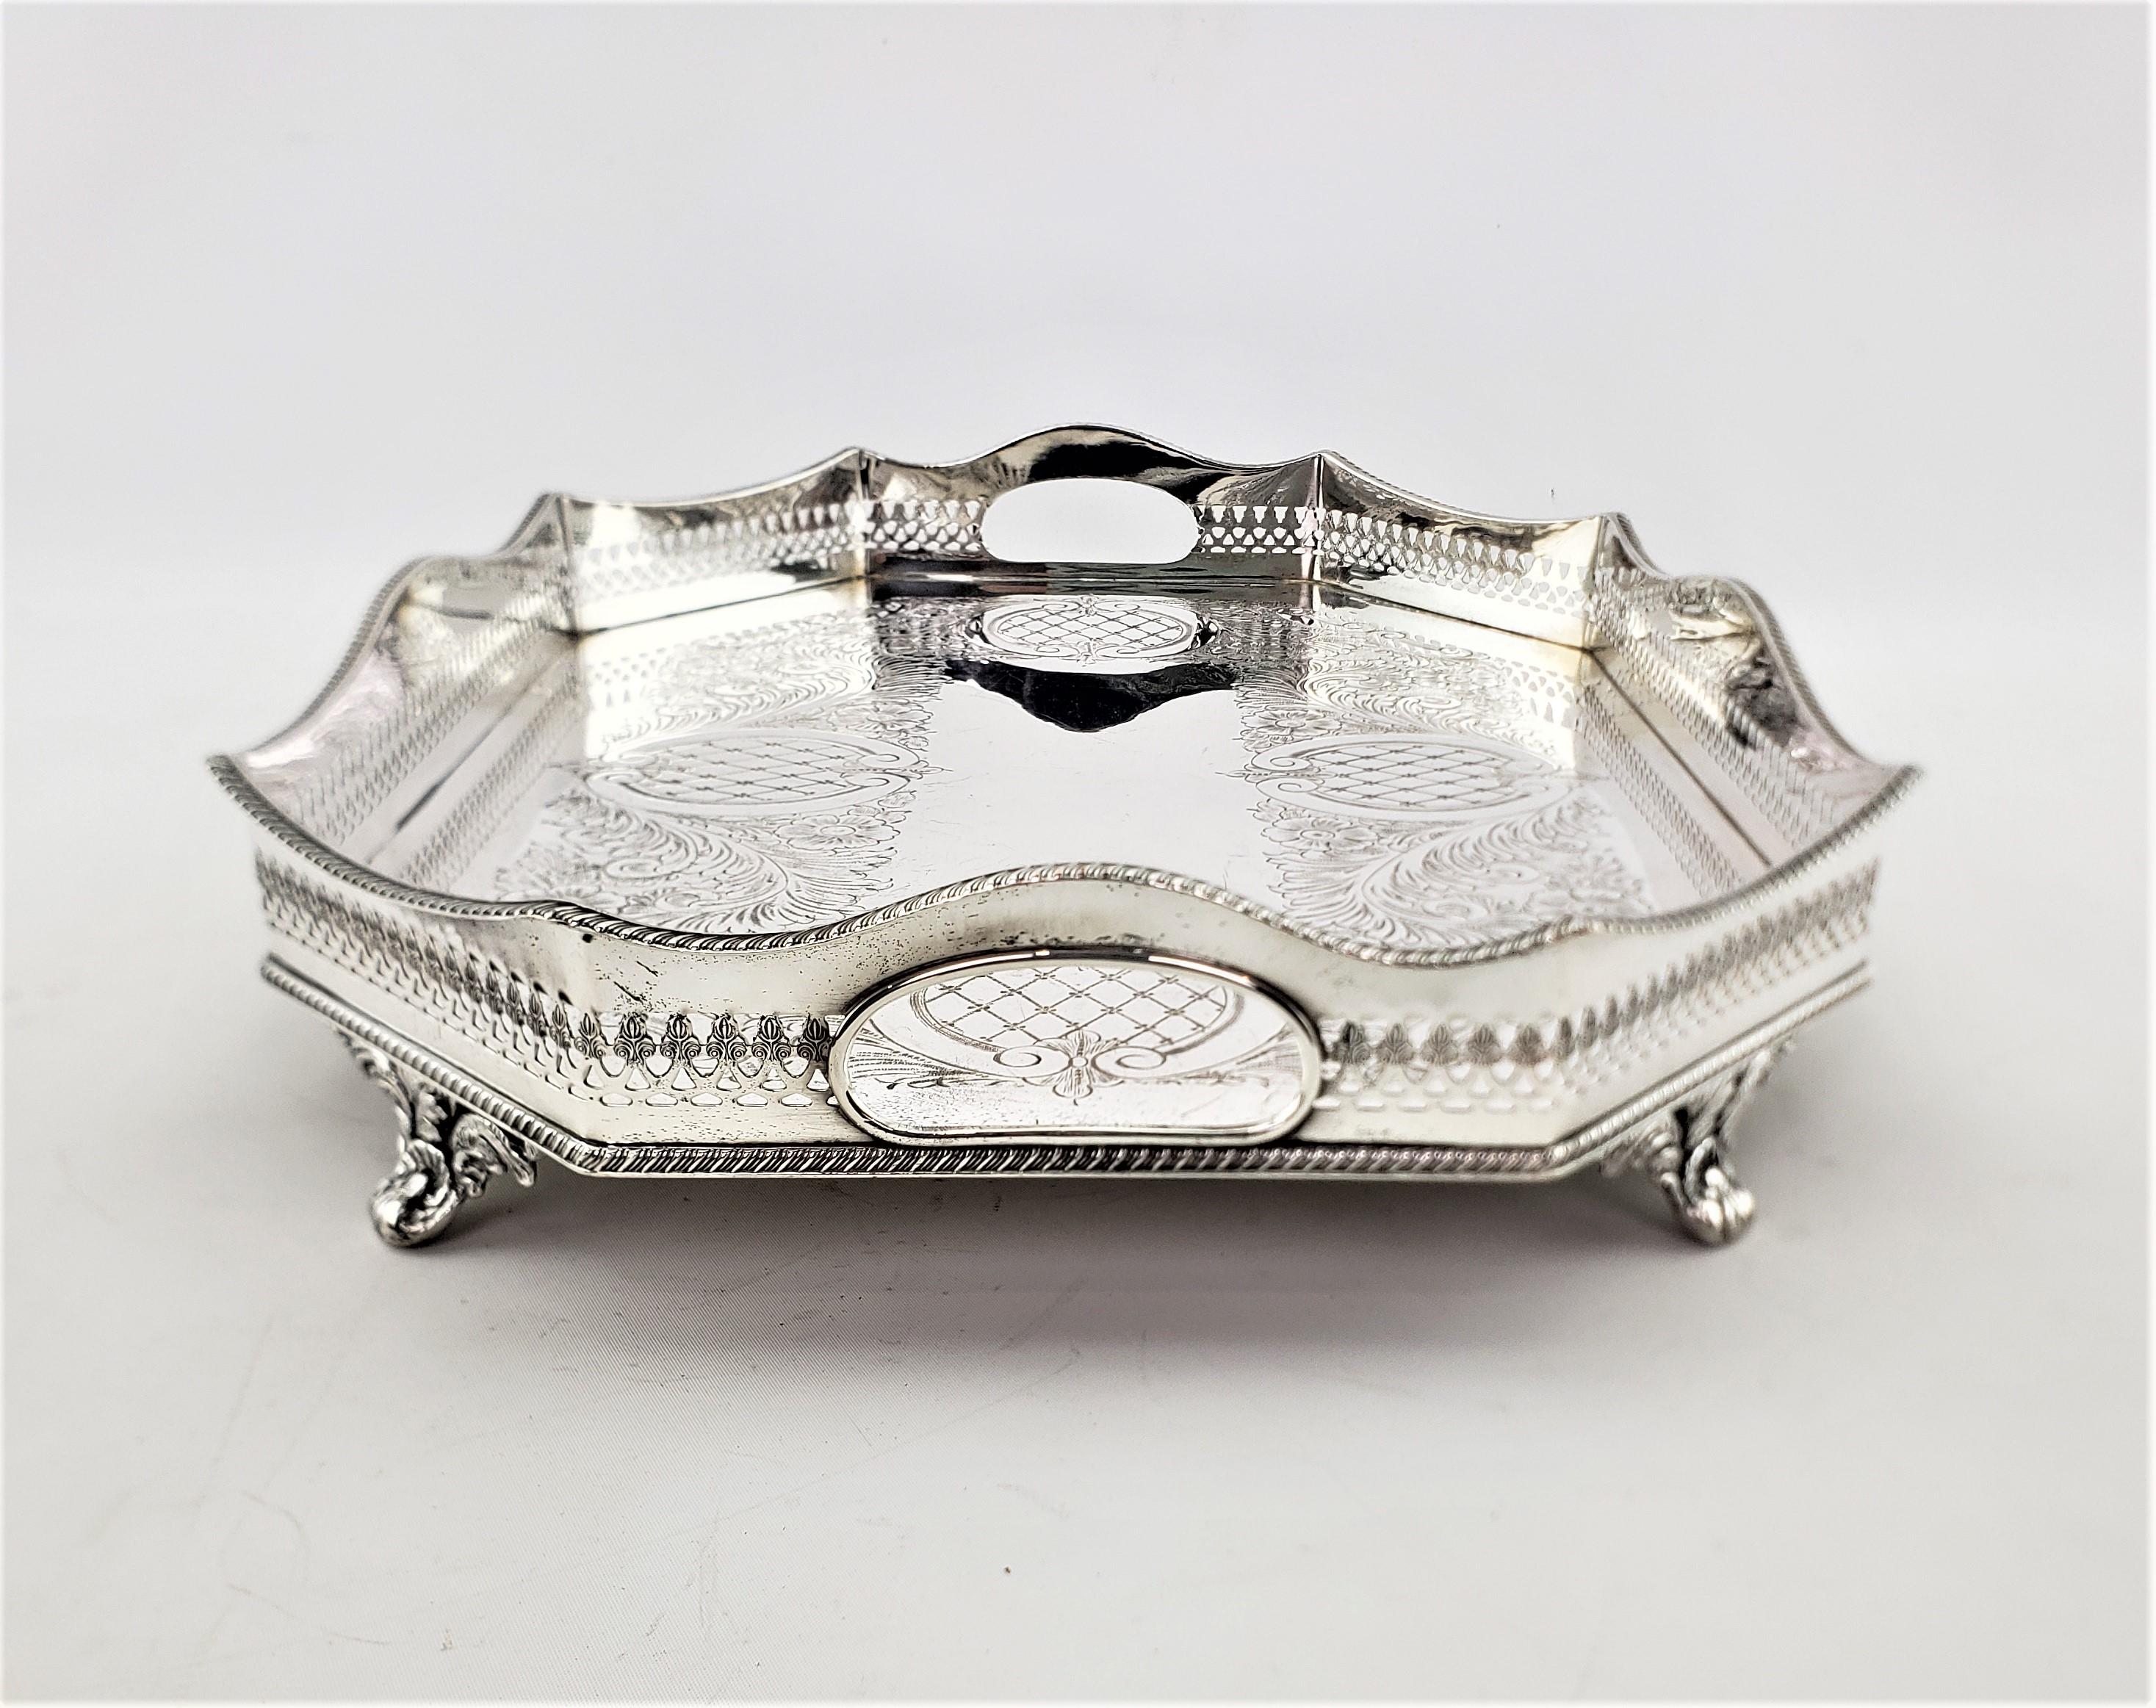 20th Century Antique English Silver Plated Footed Gallery Serving Tray with Ornate Engraving